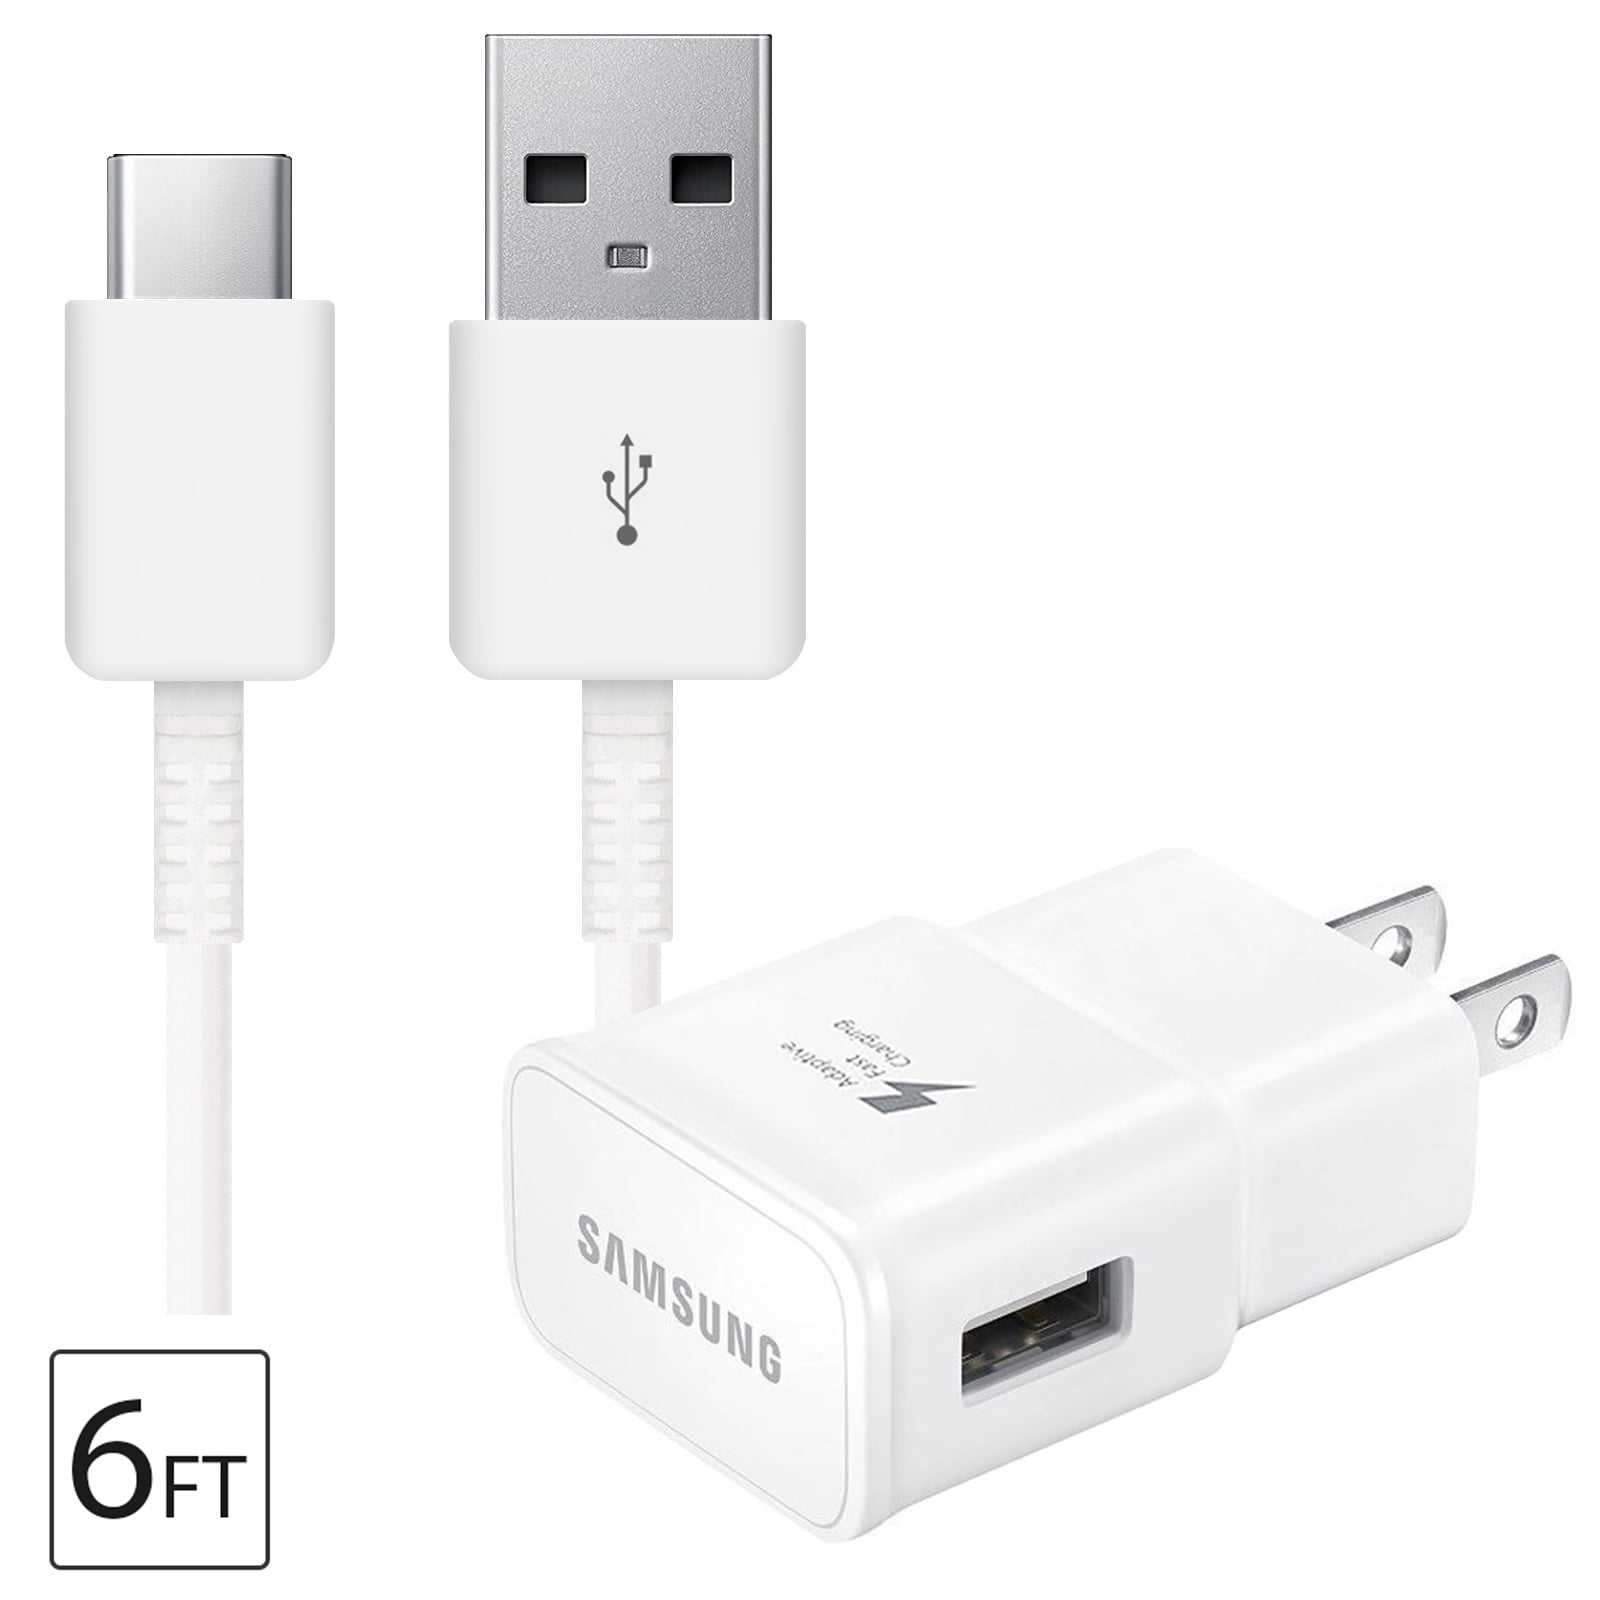 15 Charger, 20W USB C Power Delivery Wall Charger Plug with 10ft Type C to  Type C Cable Fast Charging Data Sync Cord Compatible with 15/15 pro/max  Samsung Galaxy S23 Ultra/S23/S23+/S22/ 